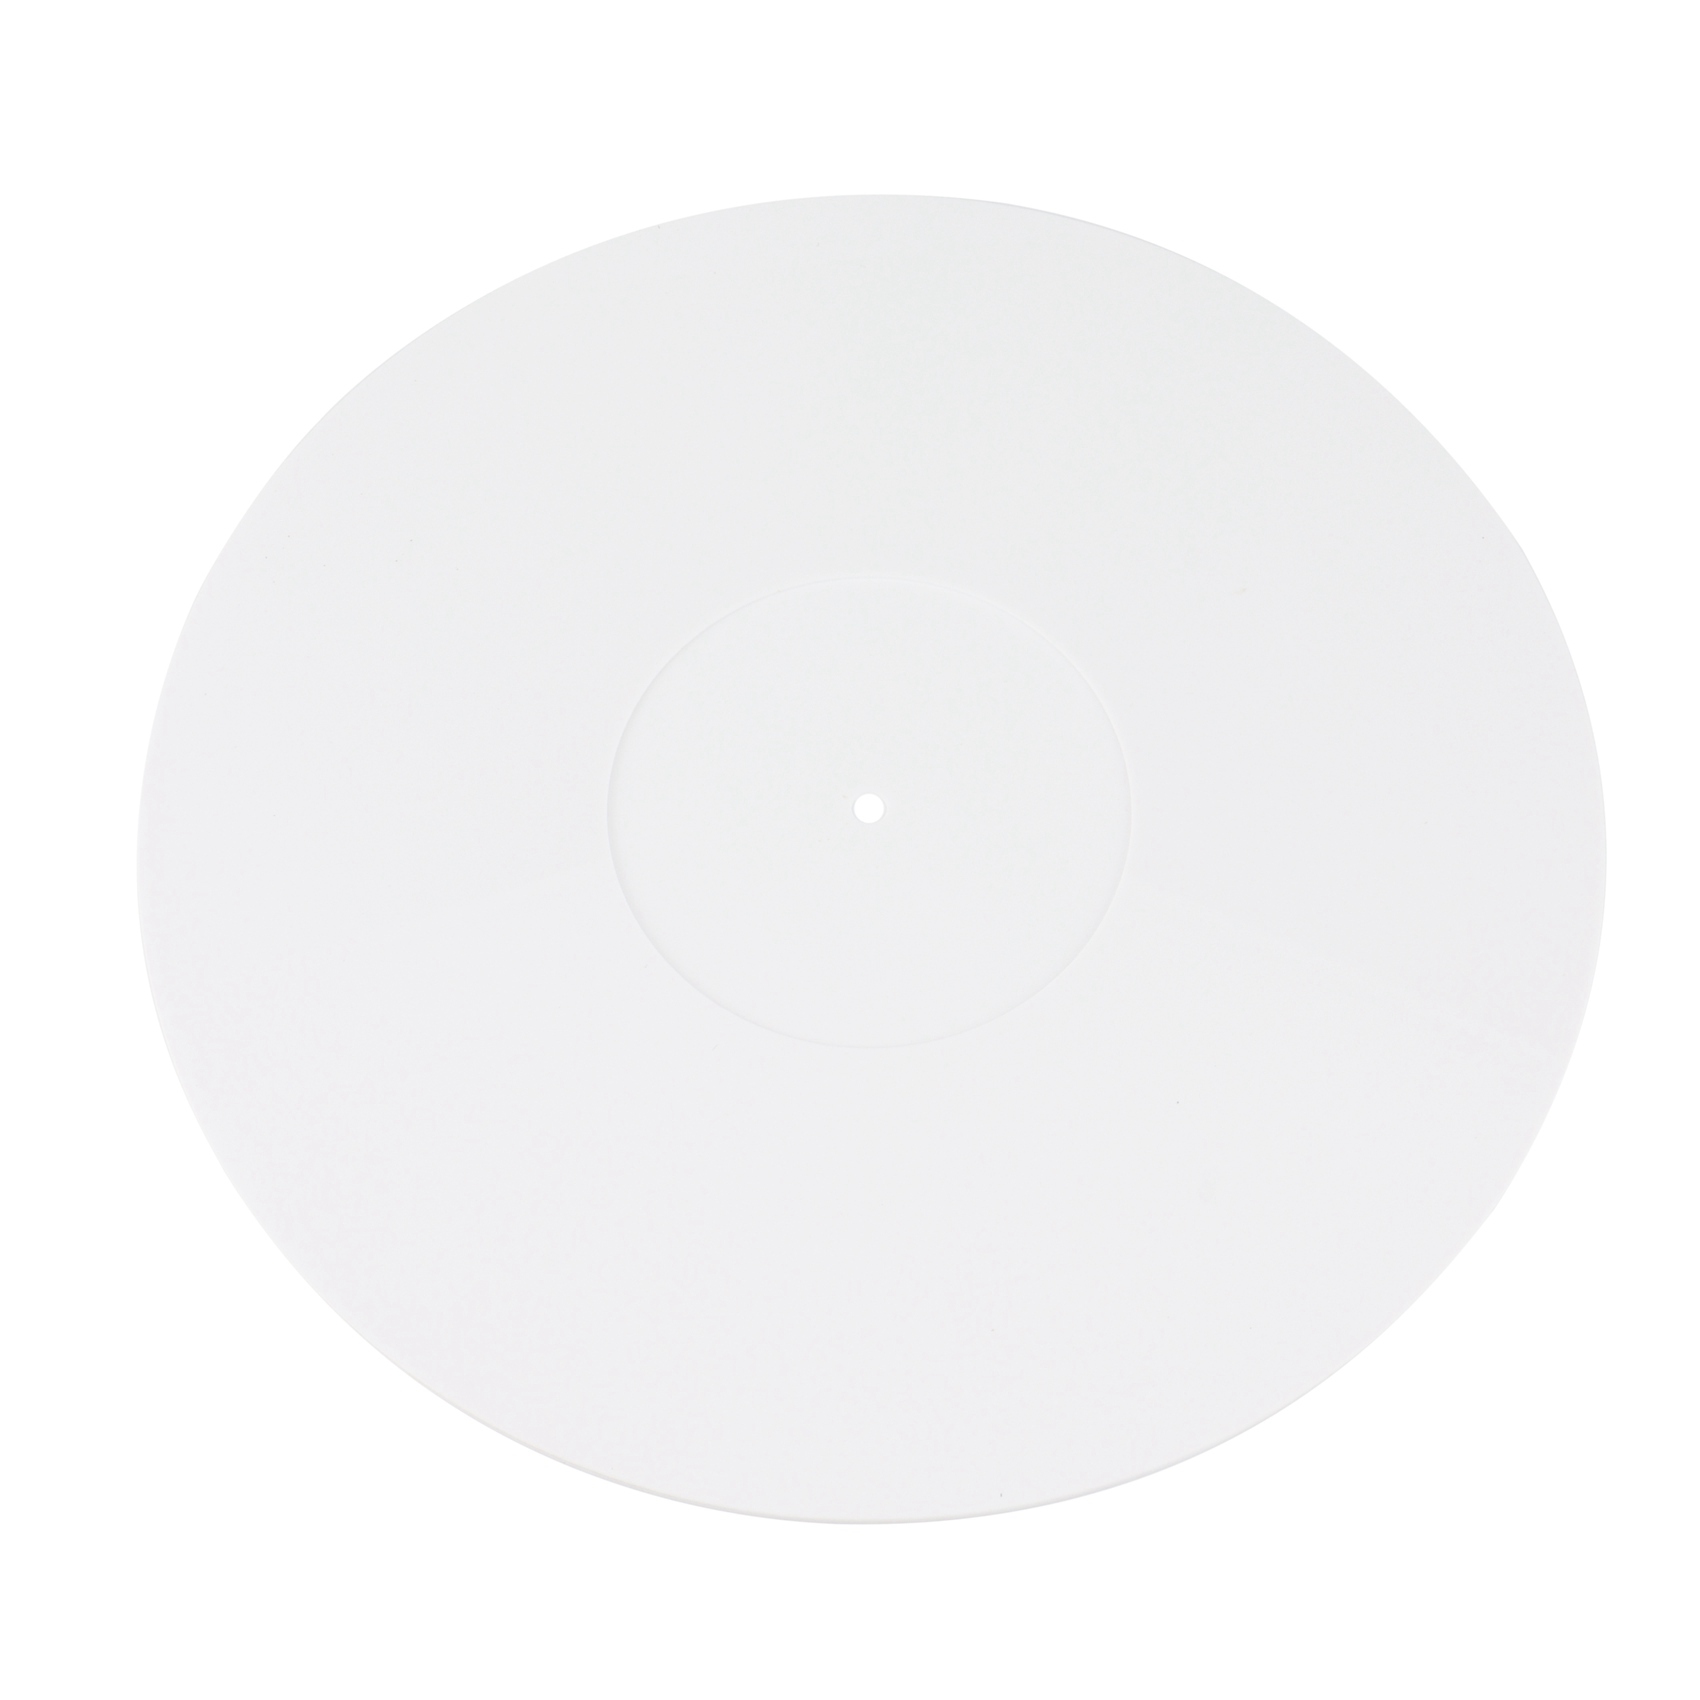 Turntable Mat- Acrylic Slipmat for Vinyl LP Record Players - Help Reduce Noise Due to Static and Dust